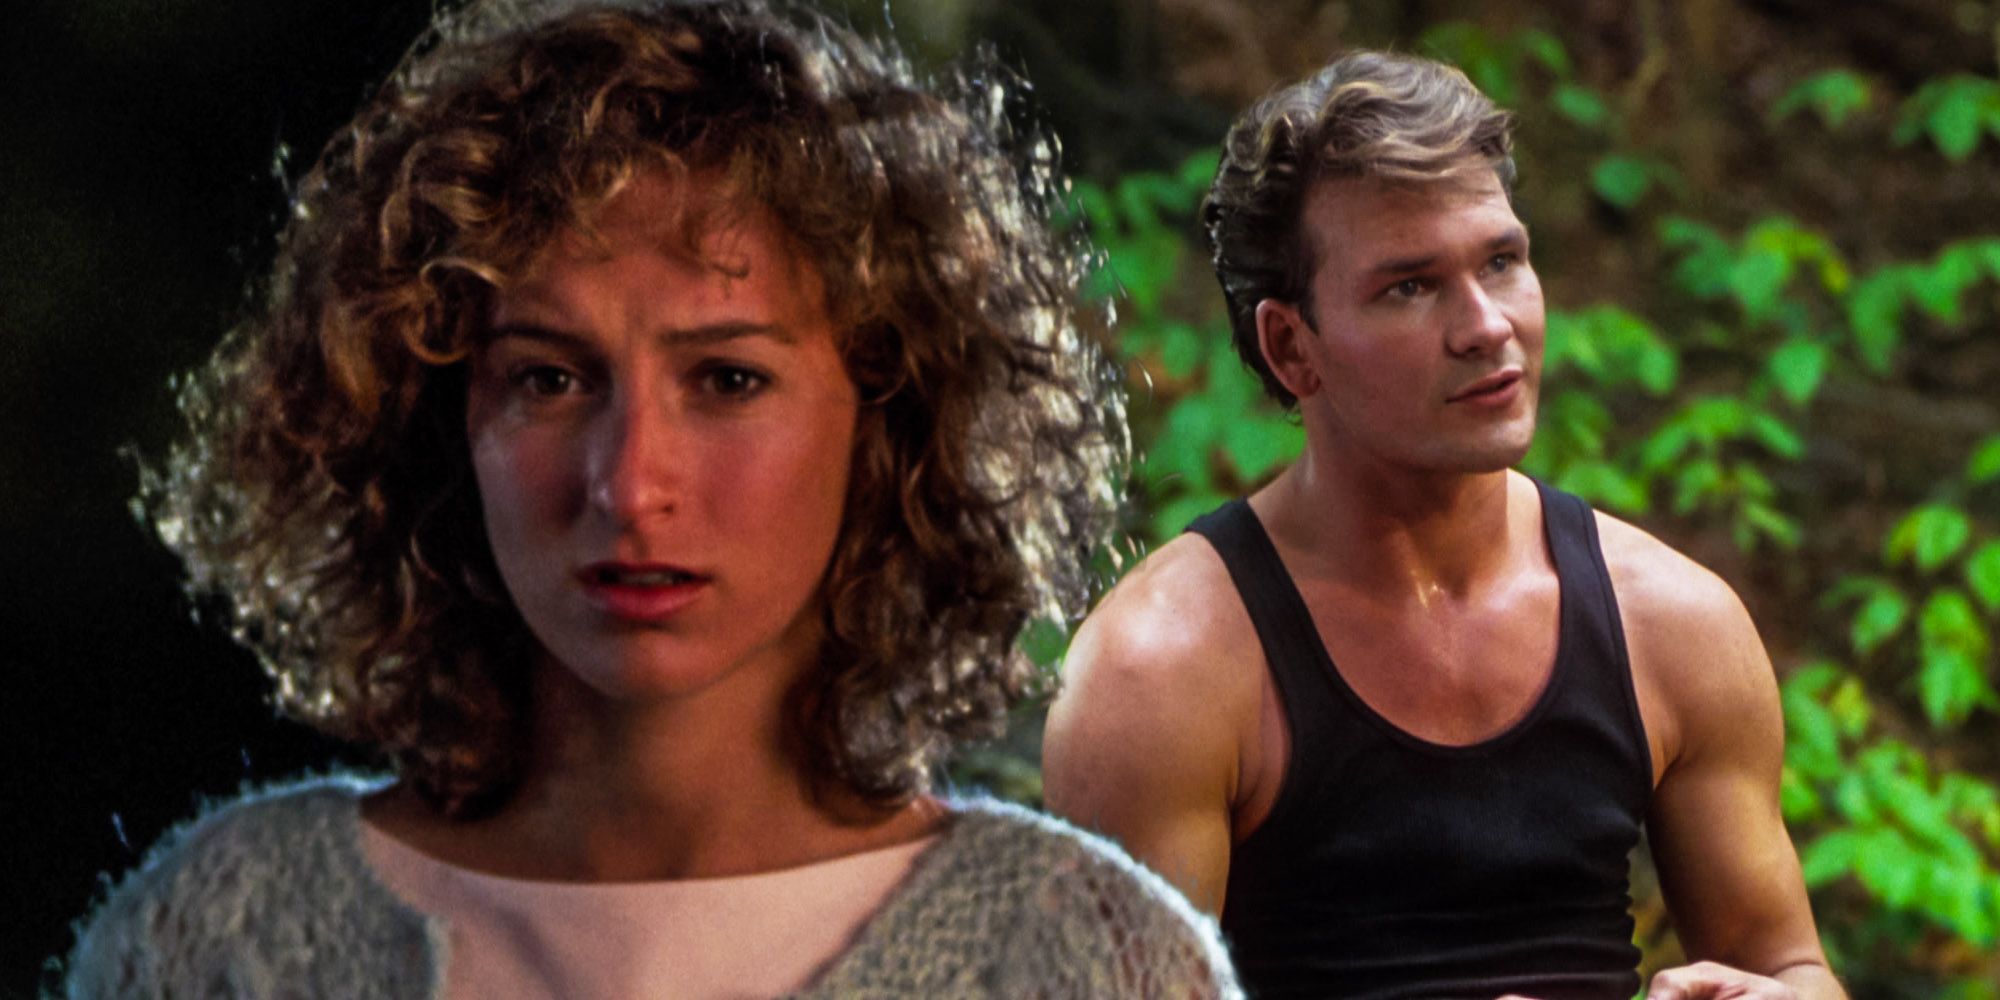 Dirty Dancing aged surprisingly well patrick swayze